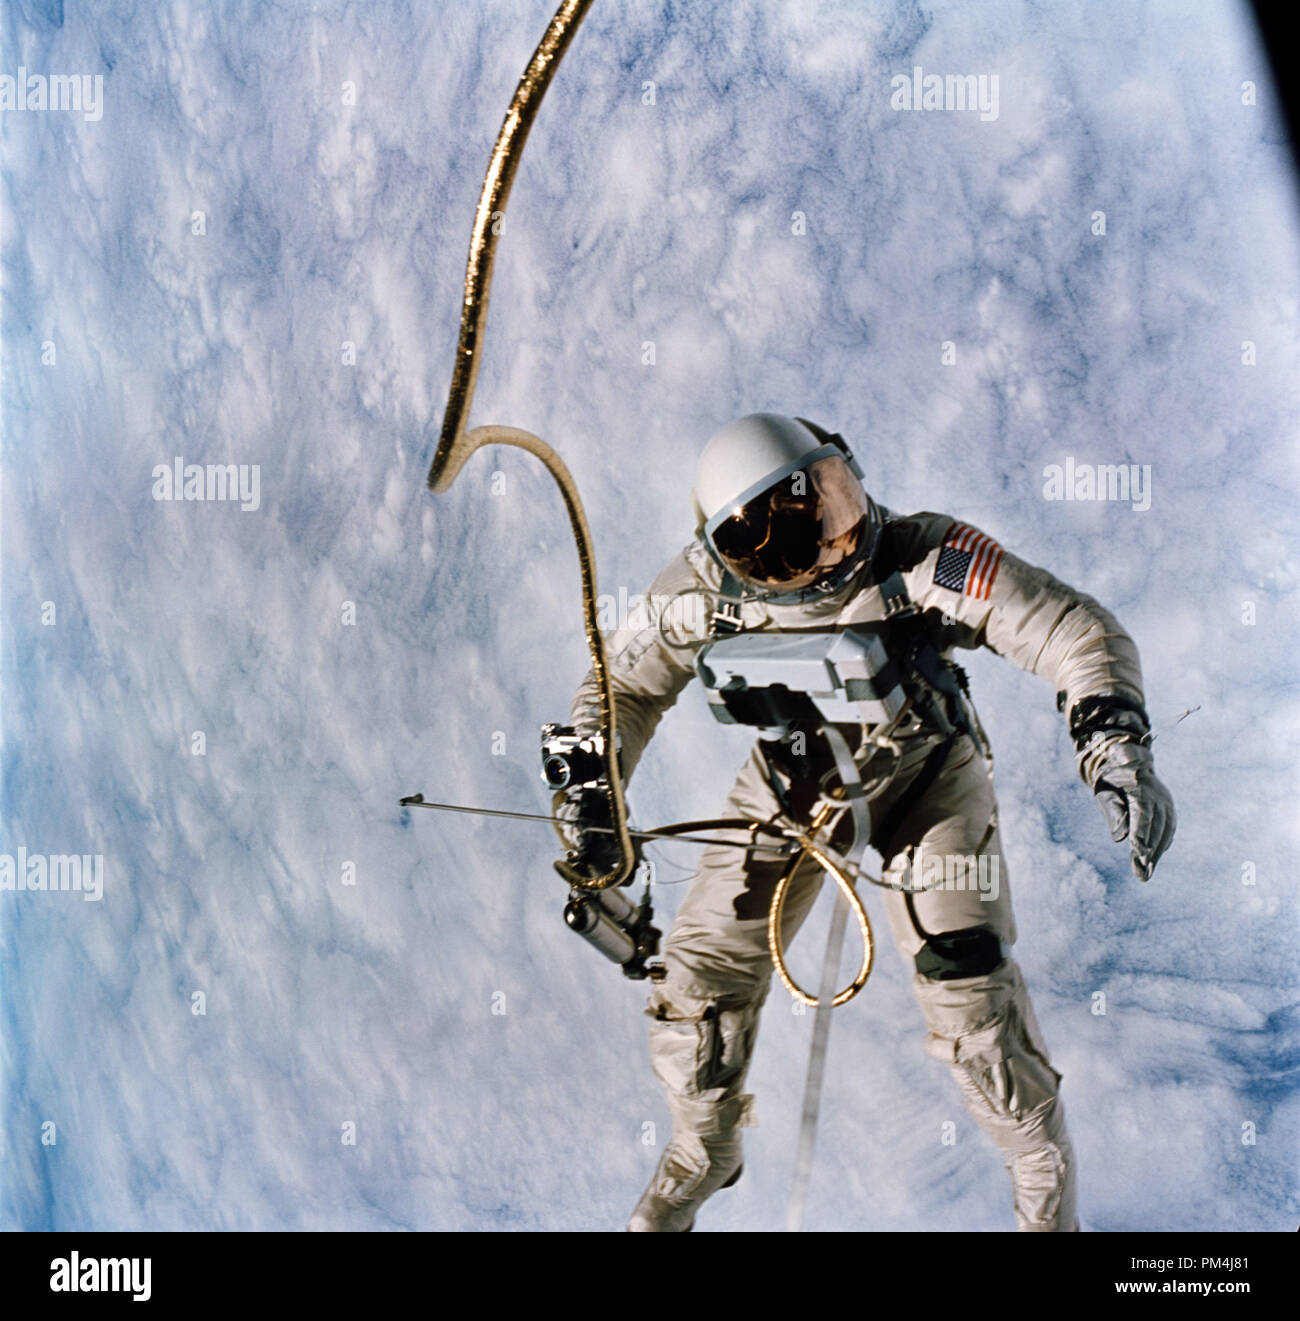 Astronaut Edward H. White, pilot for the Gemini IV spaceflight, floats in space during the first spacewalk by an American. The extravehicular activity, or spacewalk, was performed during the third Earth orbit of the Gemini IV mission. White is attached to the spacecraft by a 25-foot umbilical line and a 23-foot tether line, both wrapped in gold tape to form one cord. In his right hand White carries a Hand-Held Self-Maneuvering Unit. The visor of his helmet is gold-plated to protect him from the unfiltered rays of the sun. (June 3, 1965)   File Reference # 1003 592THA Stock Photo